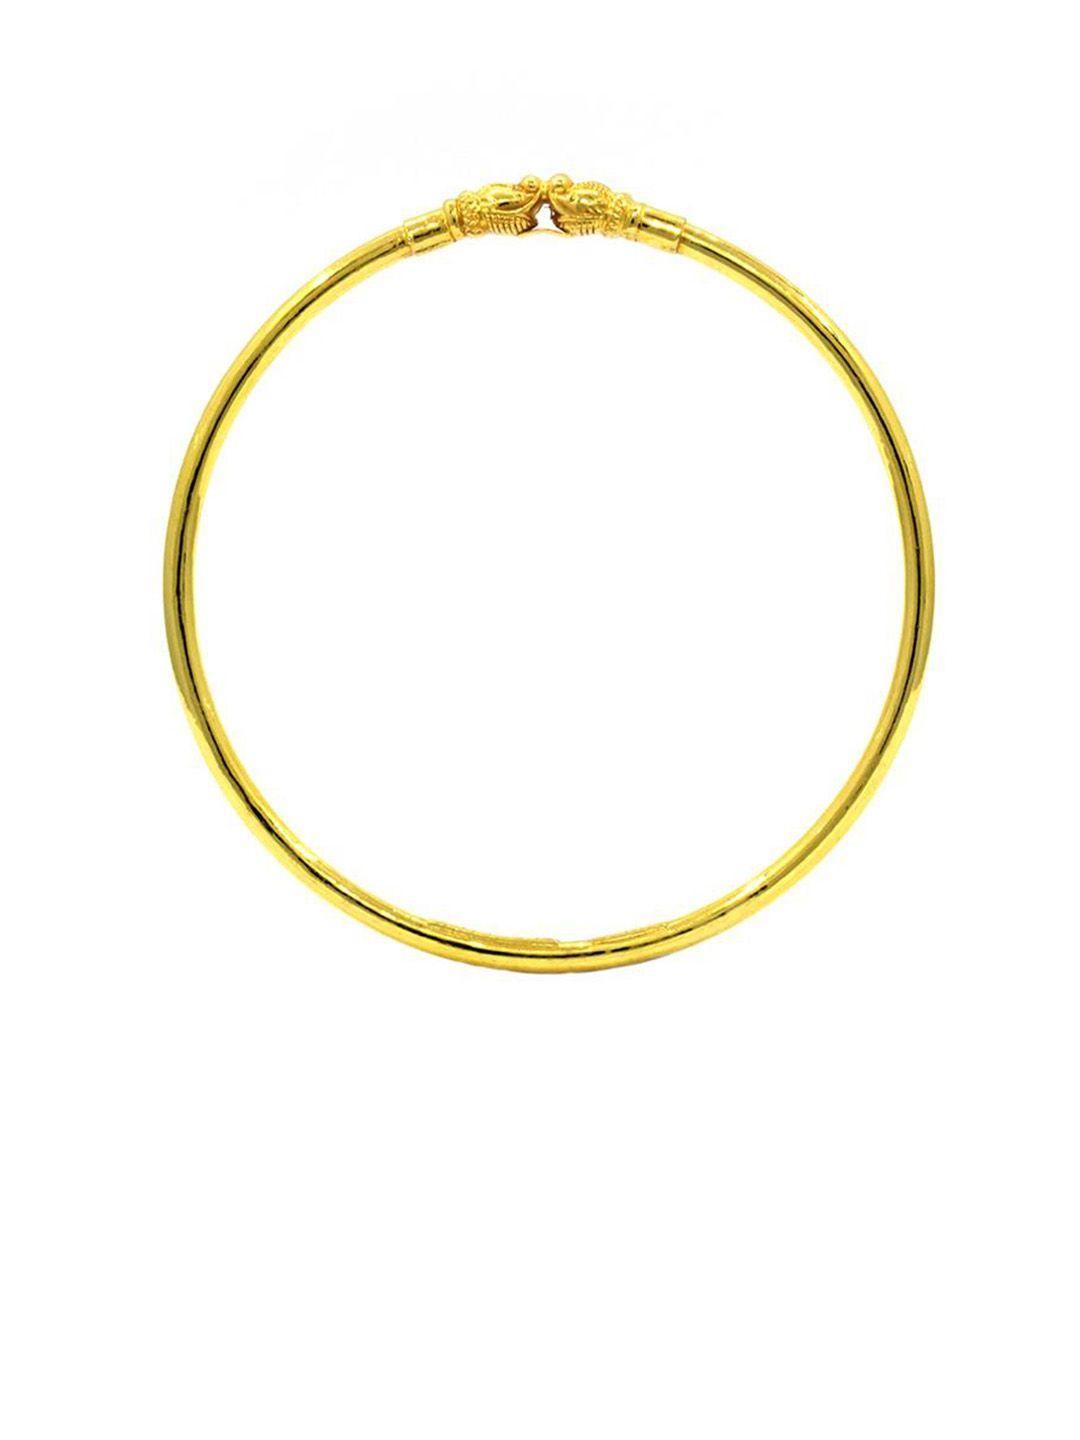 candere a kalyan jewellers company 22kt gold tushi bangle - 4.39 gm